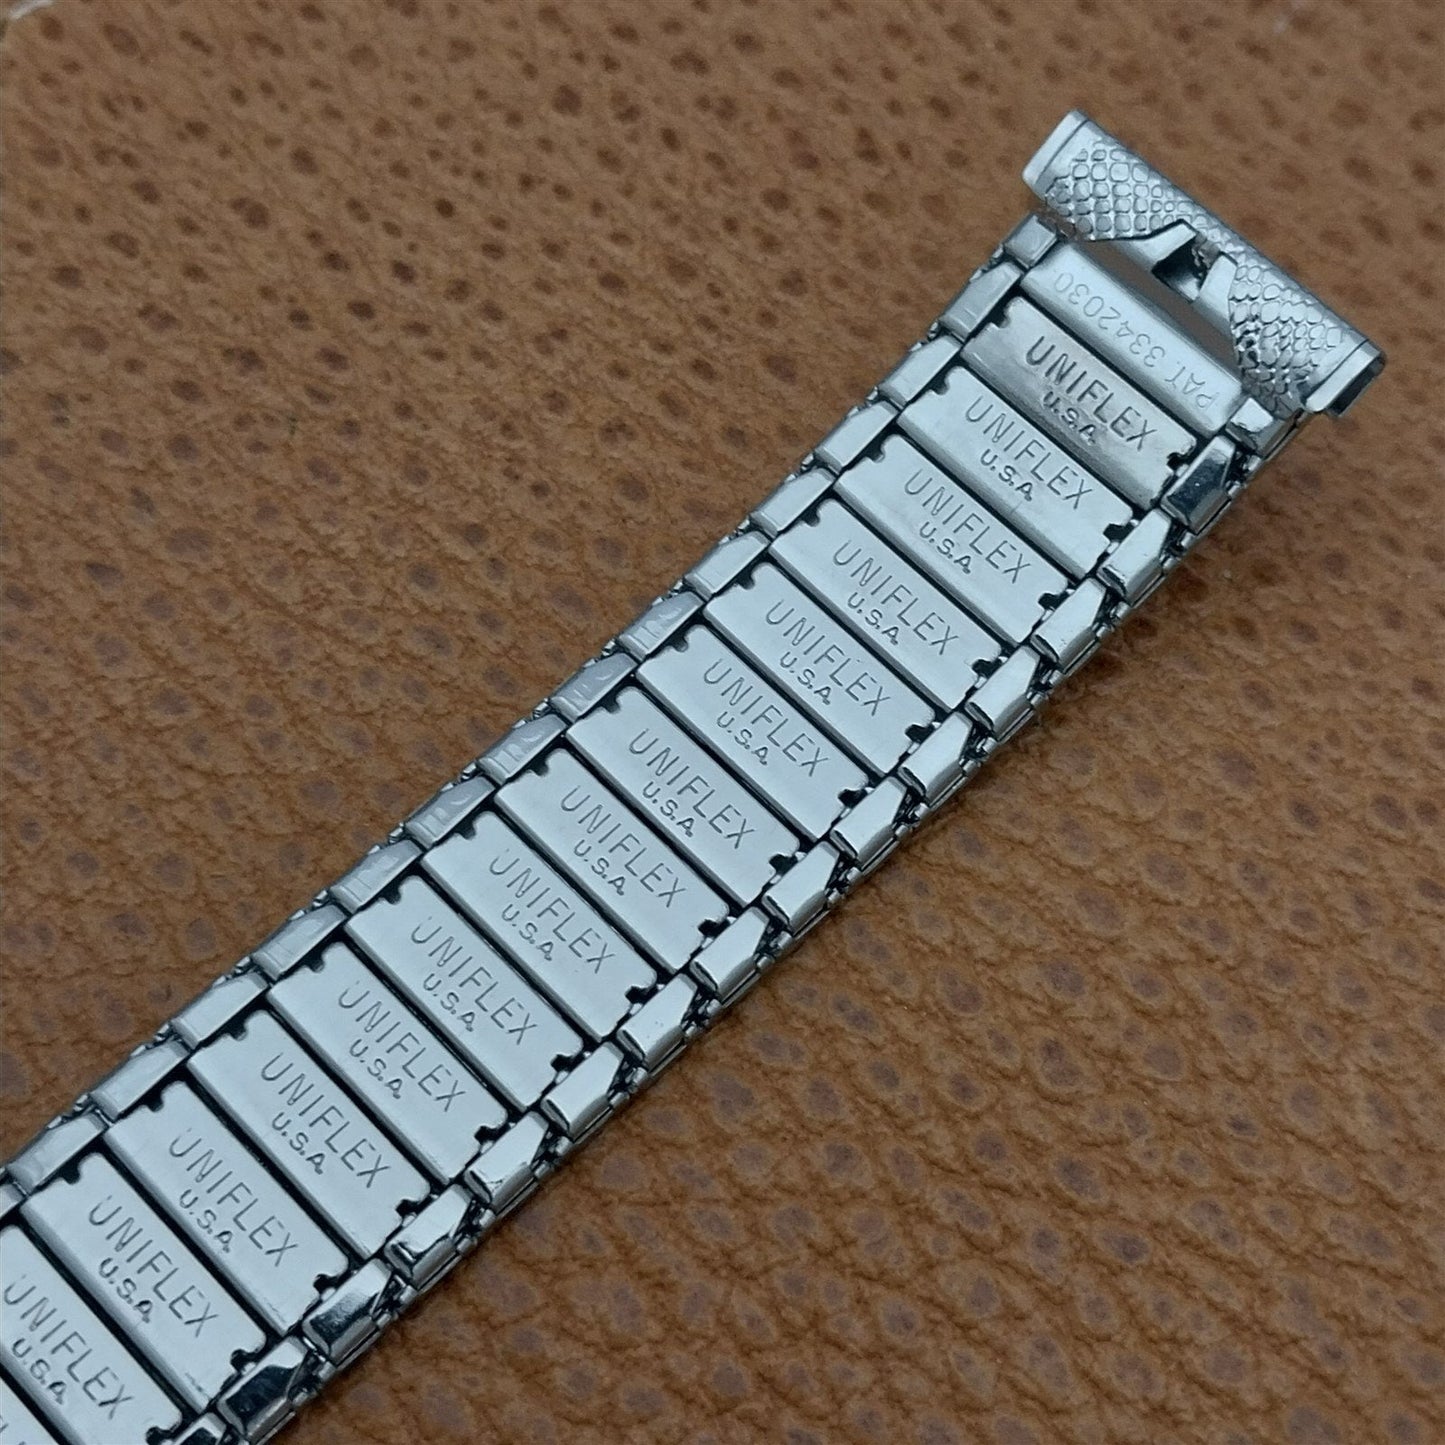 17.2mm Uniflex Slim Stainless Steel Stretch Expansion 1960s Vintage Watch Band